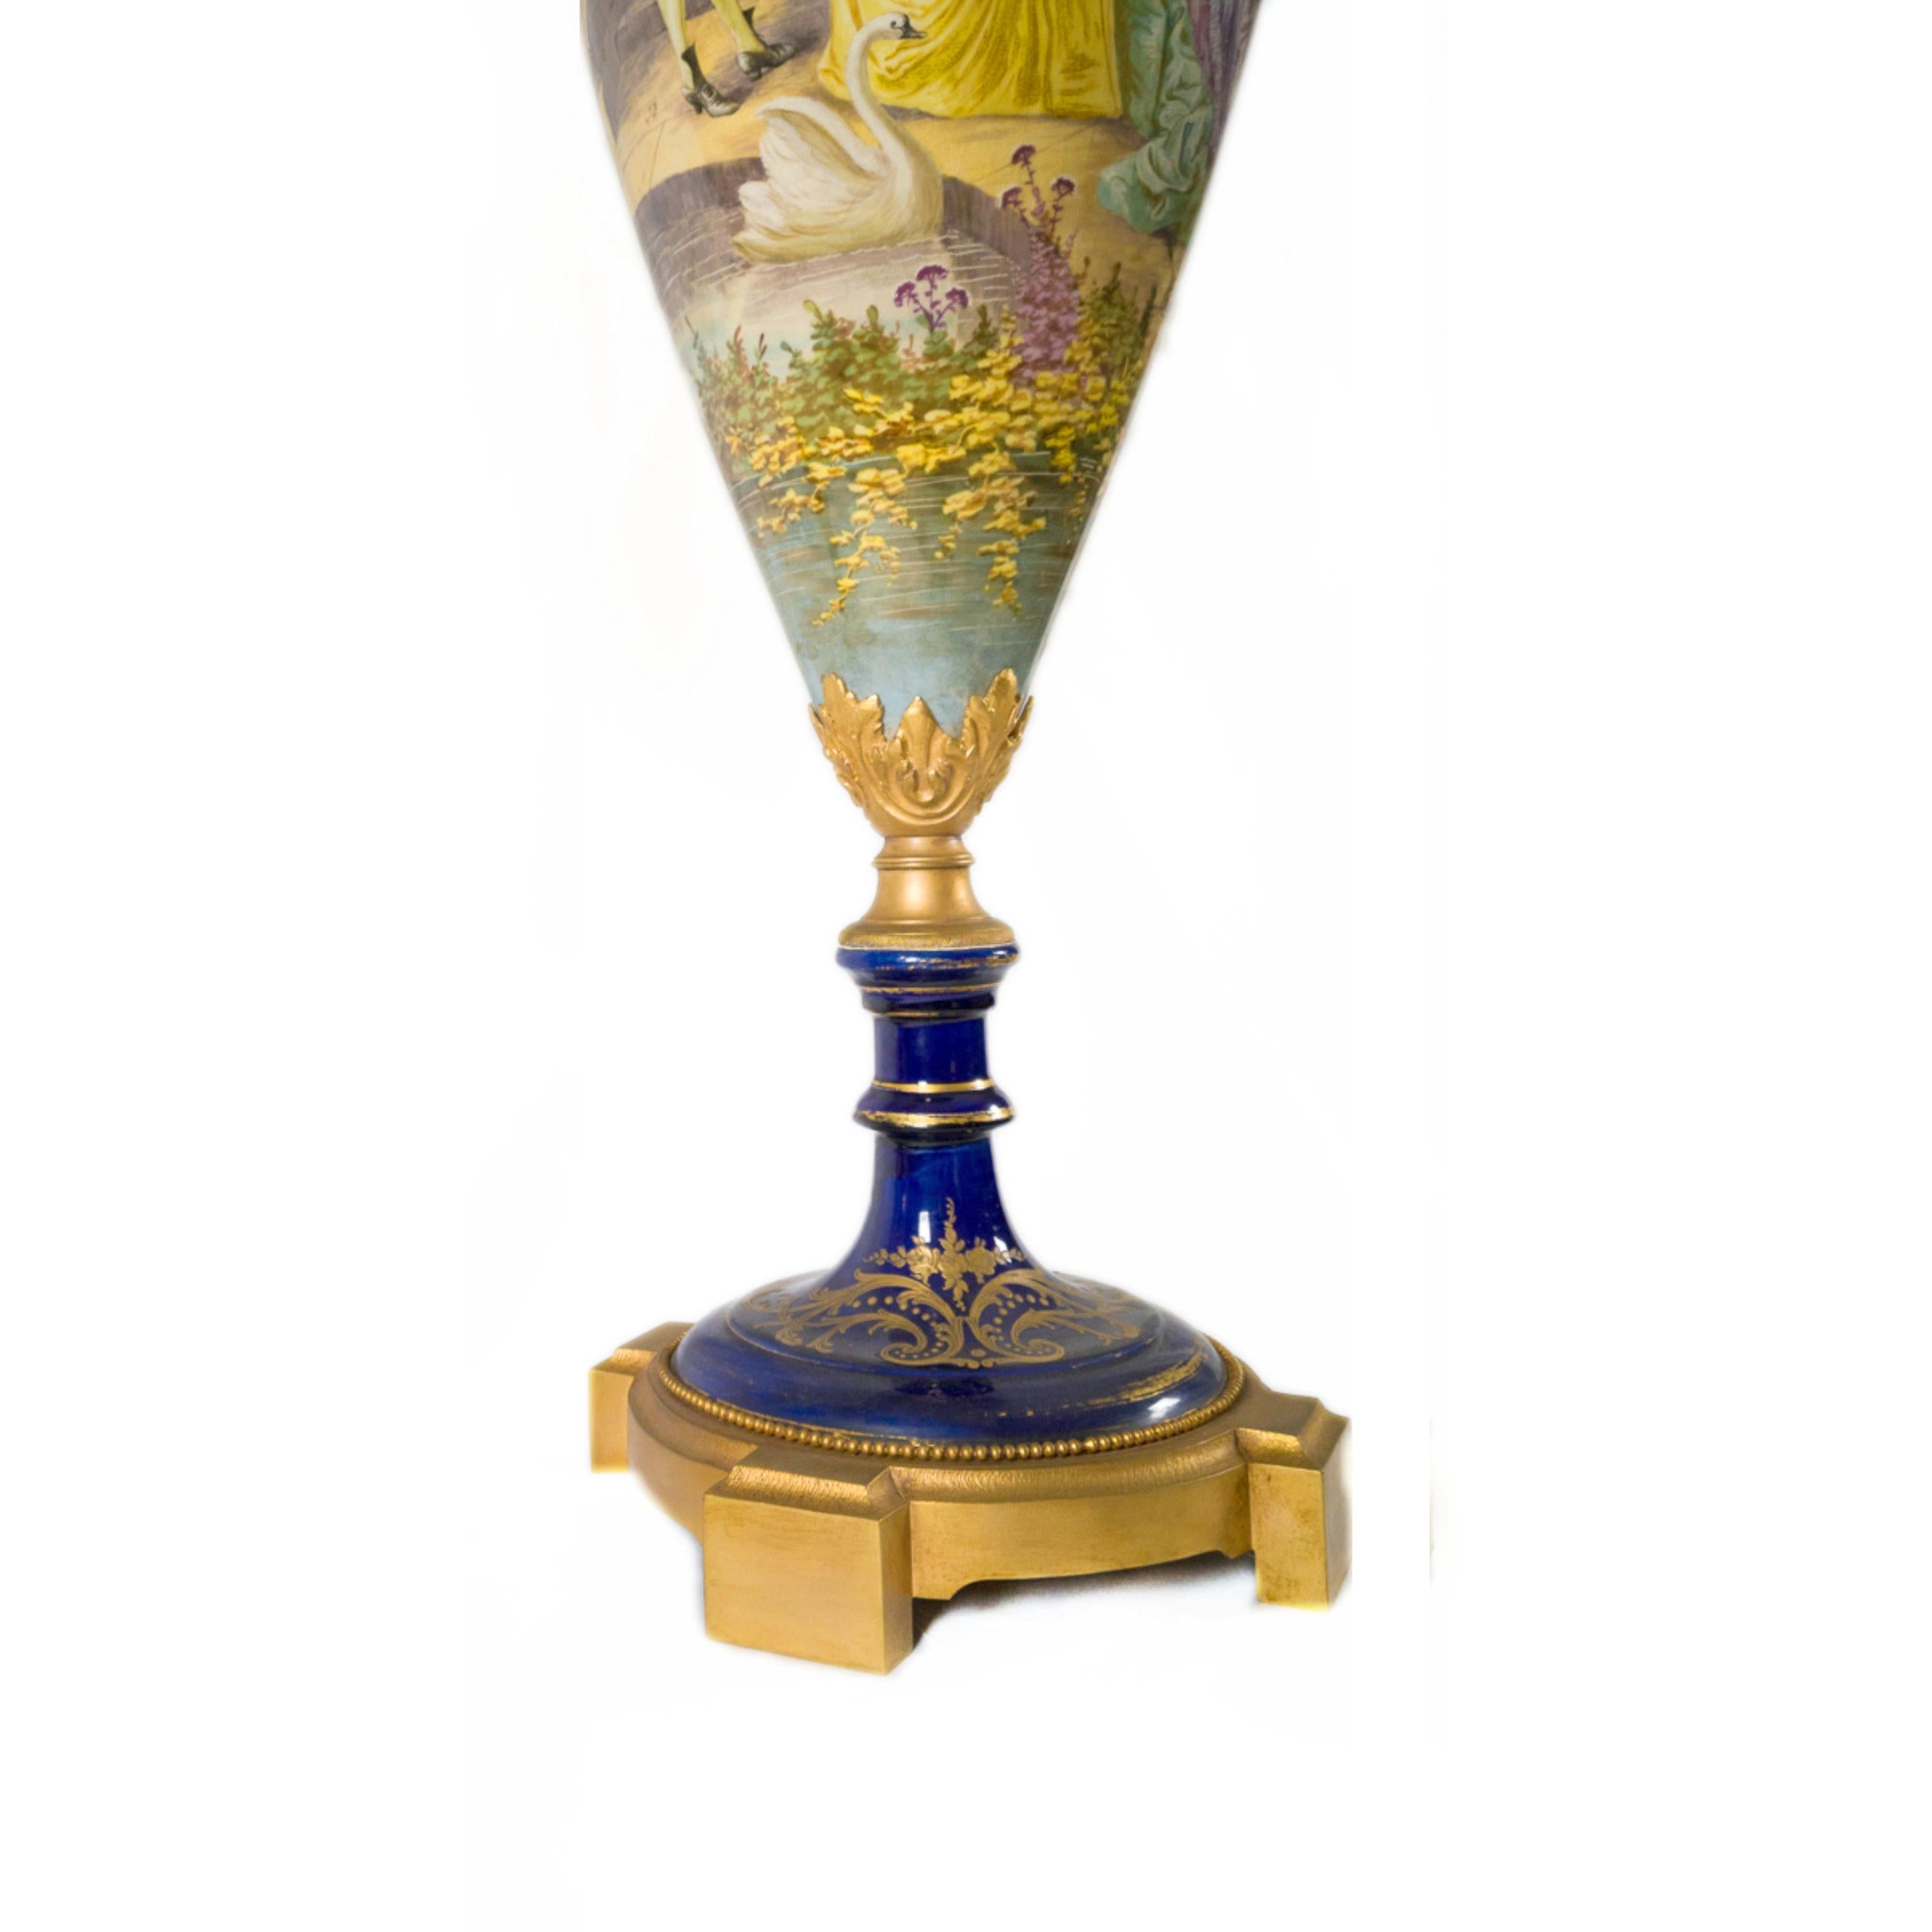 French Large Ormolu Mounted Porcelain Vase By Manufature Nationale Sèvres, 19th Century For Sale